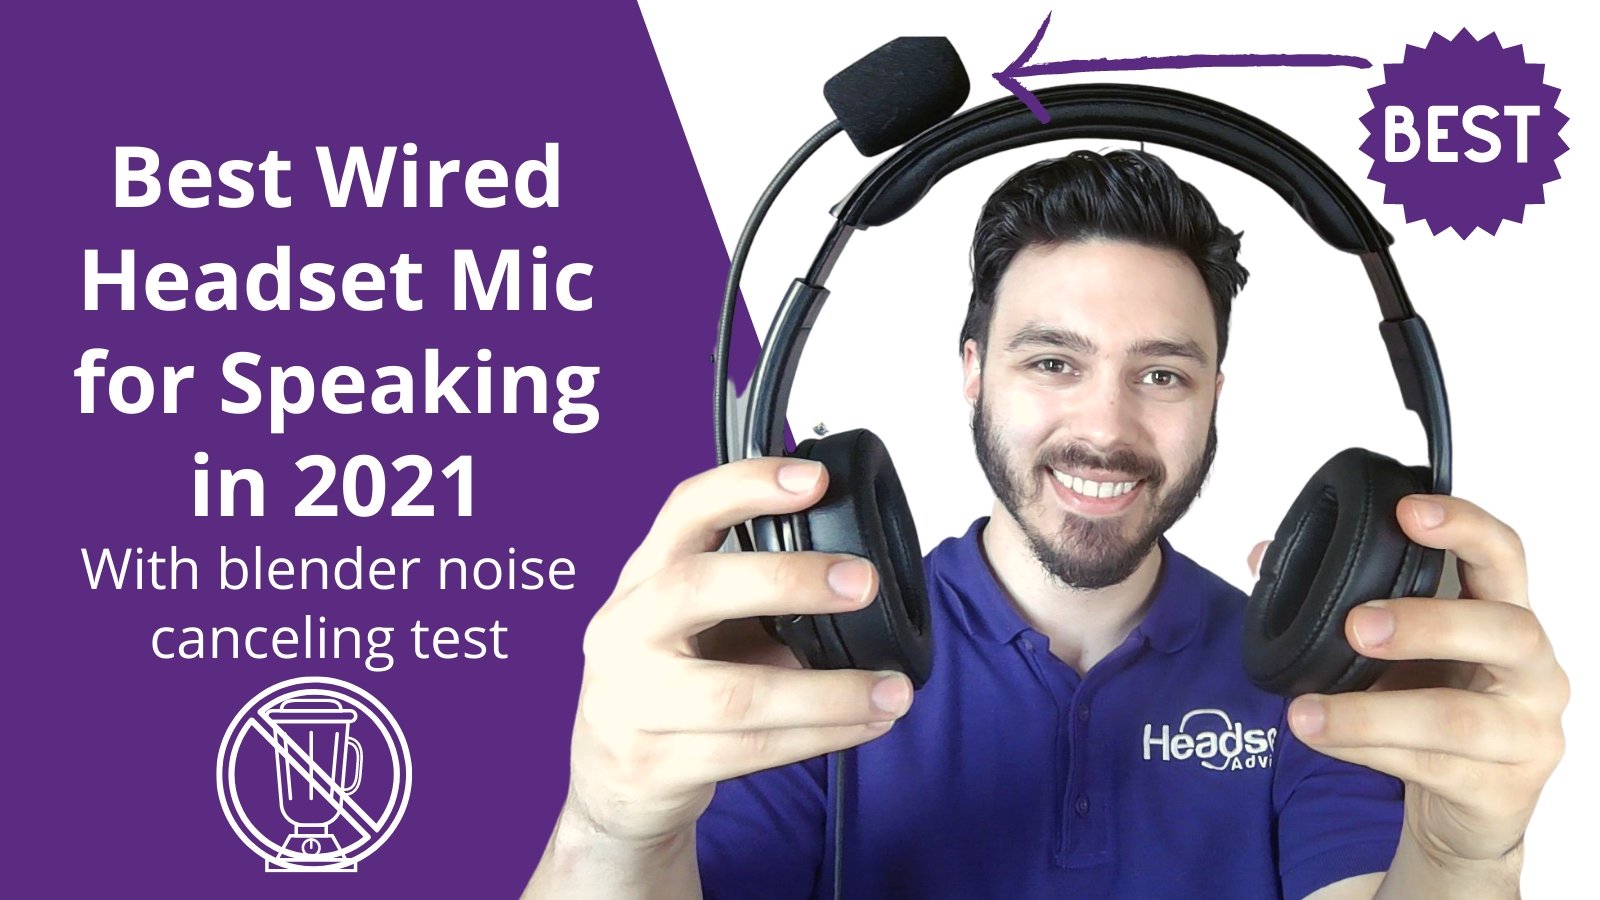 Best Wired Headset Mic for Speaking 2021 - MIC Test included! - Headset Advisor